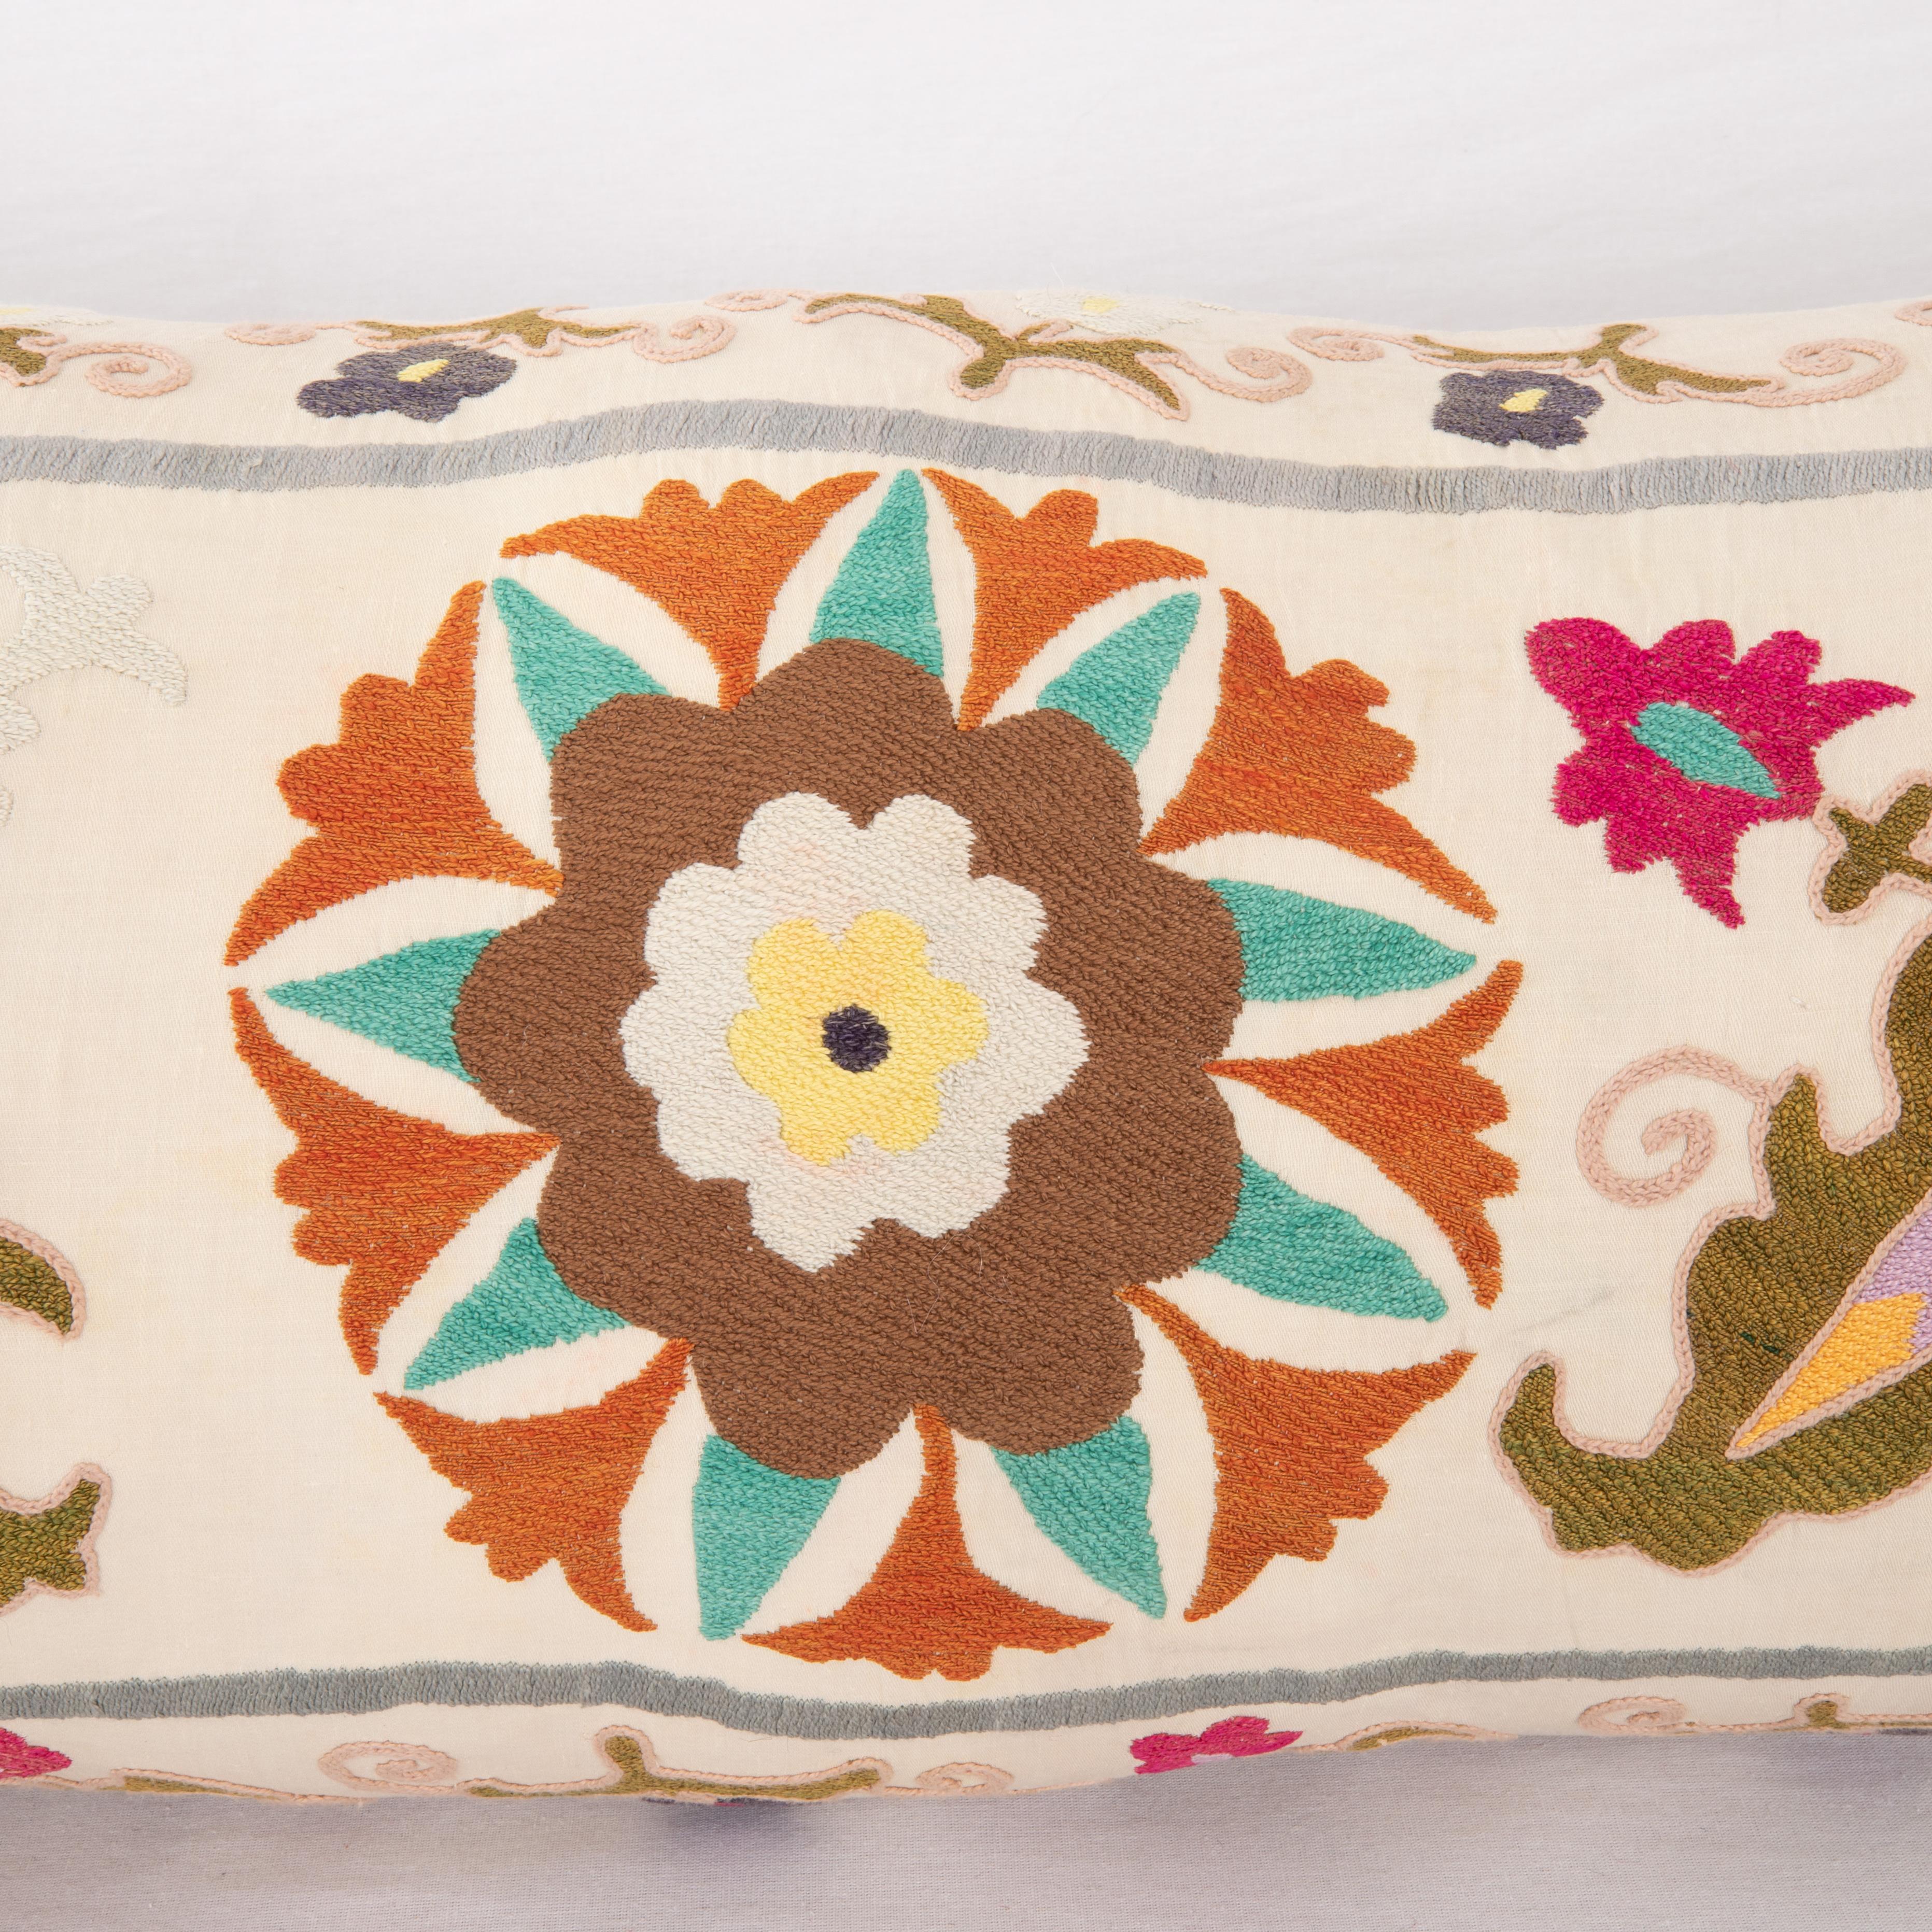 Embroidered Suzani Pillow Case Made from a Vintage Suzani, 1970s For Sale